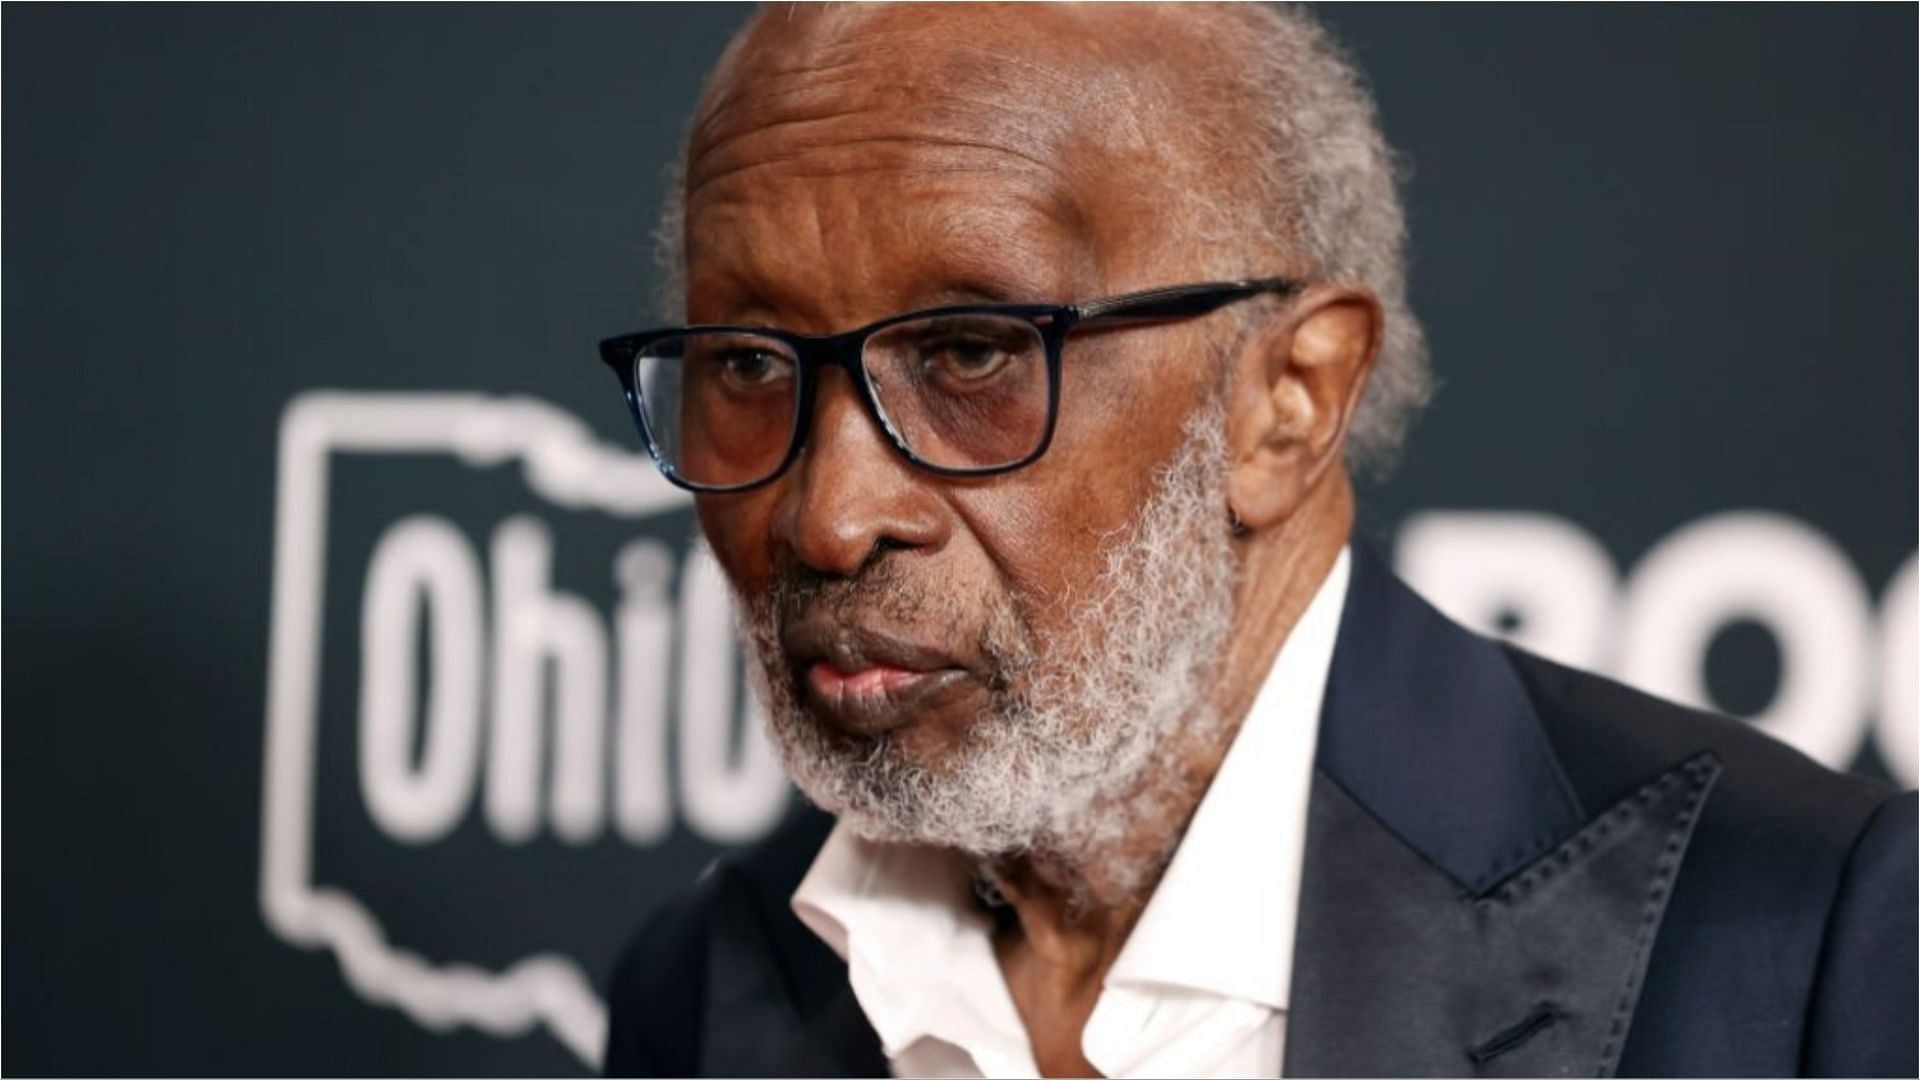 Clarence Avant recently died at the age of 92 (Image via Arturo Holmes/Getty Images)